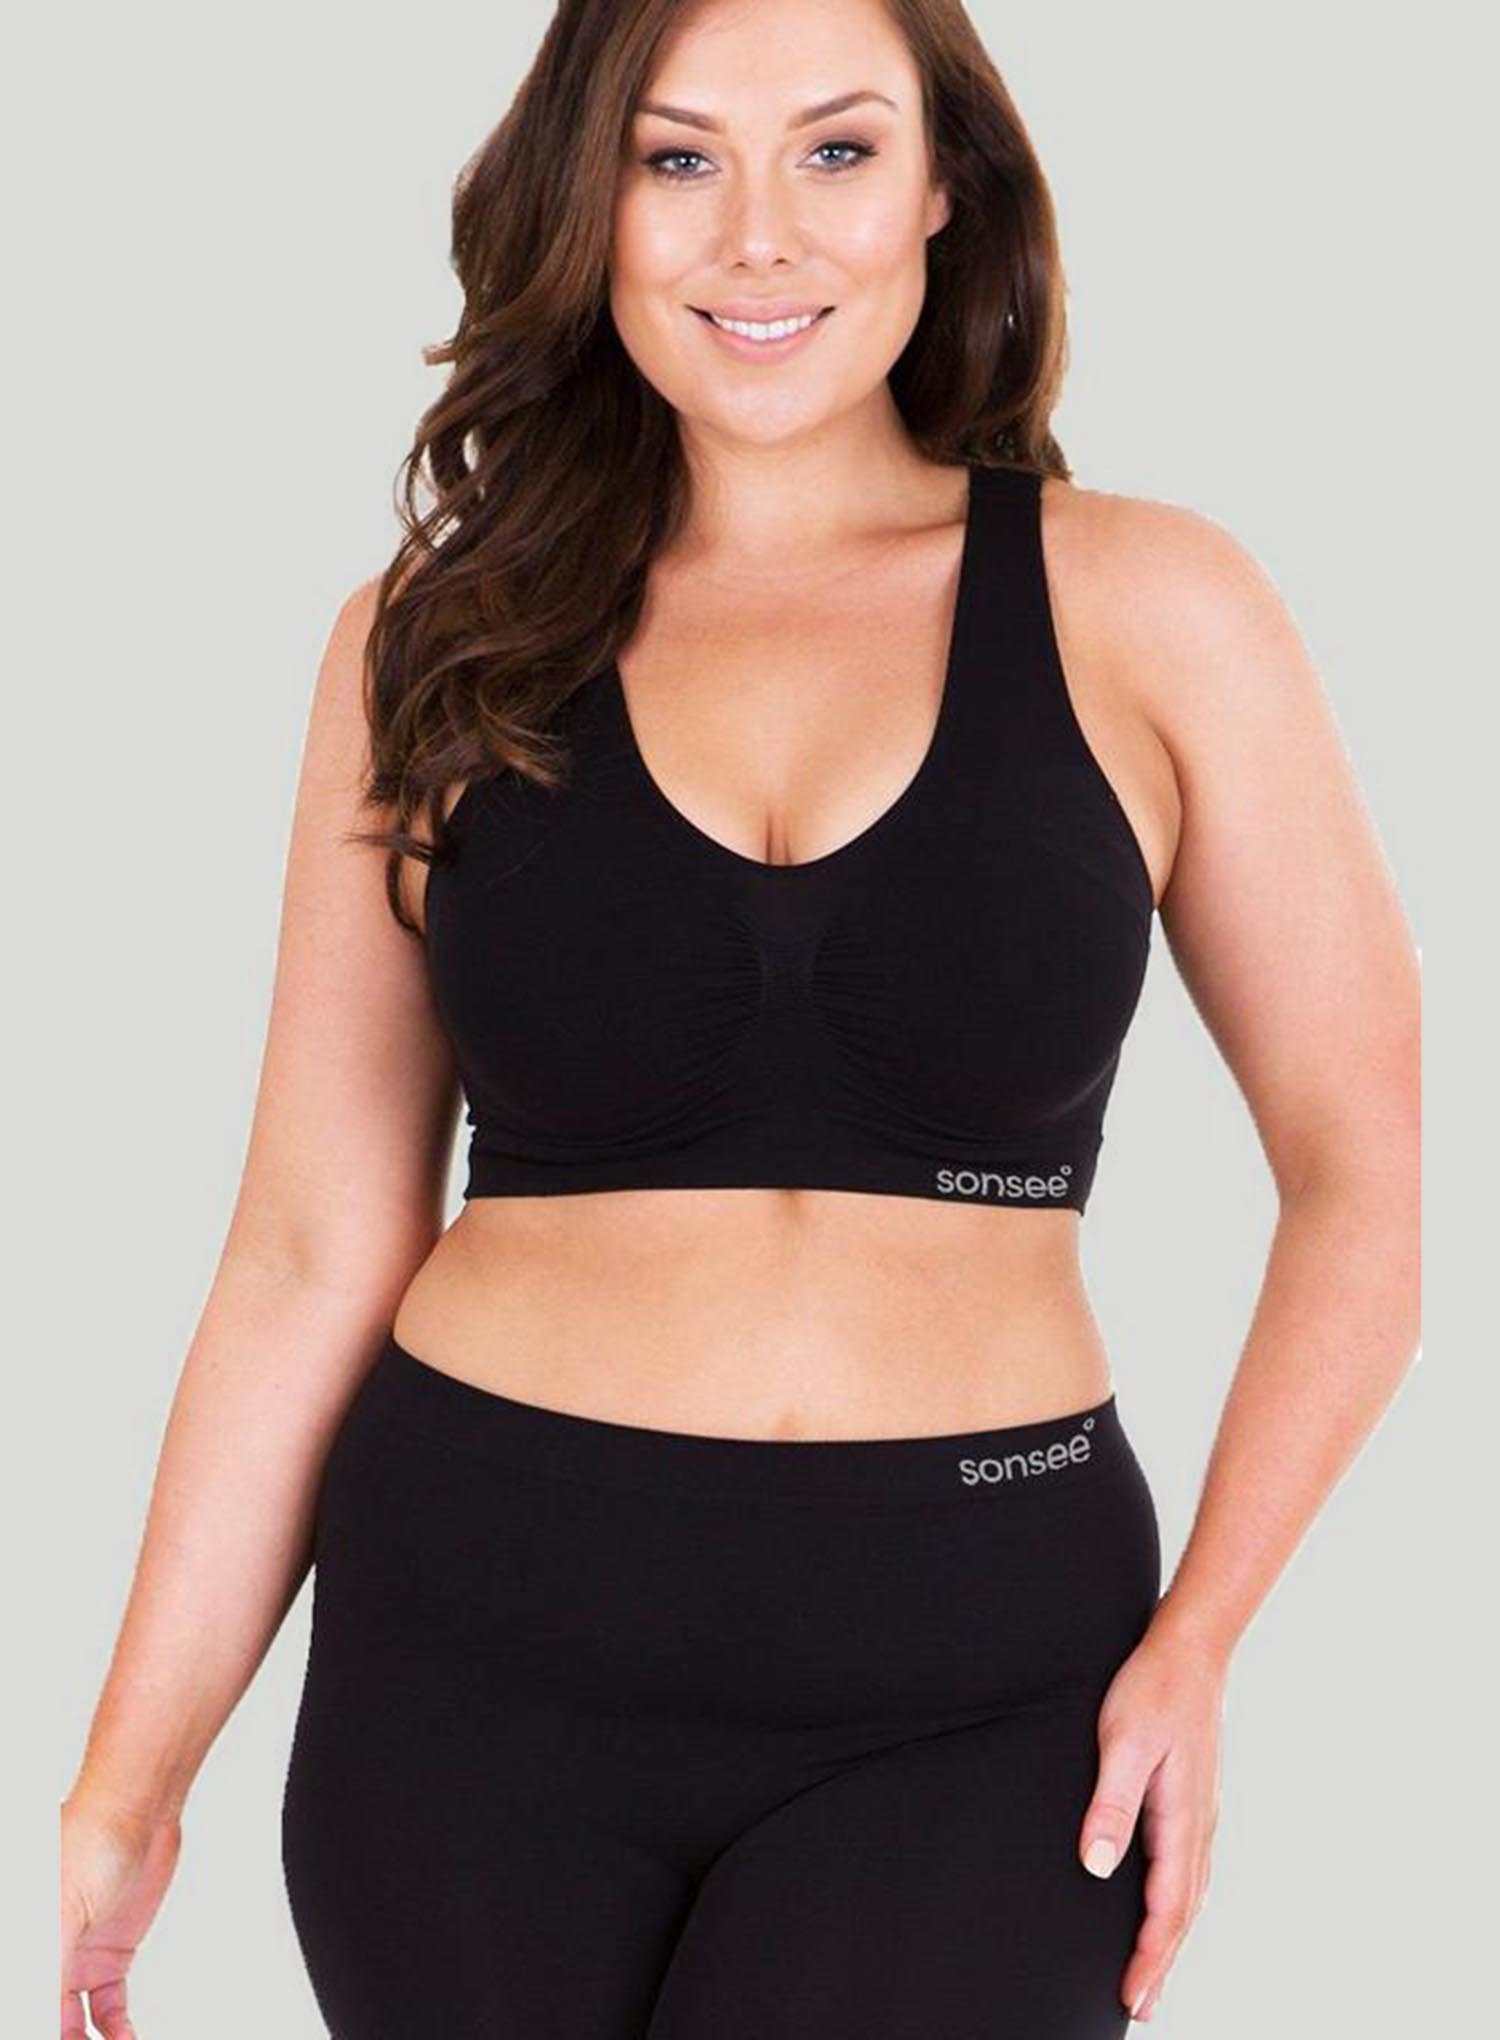 Sonsee: Sonsee Bra Wire Free With A High Back Black – DeBra's